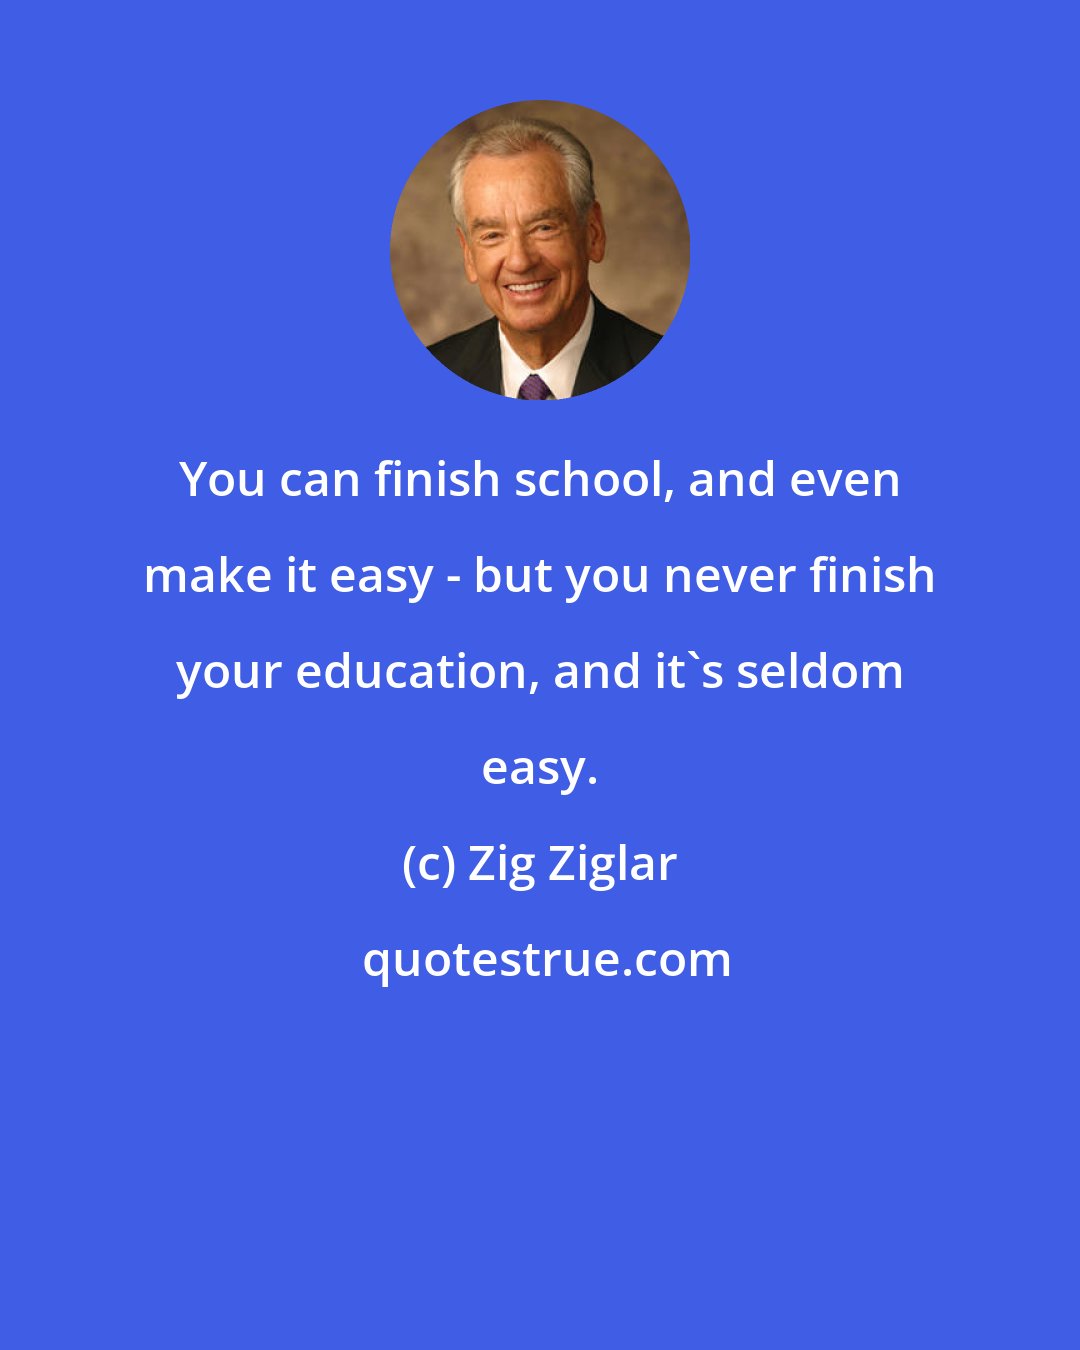 Zig Ziglar: You can finish school, and even make it easy - but you never finish your education, and it's seldom easy.